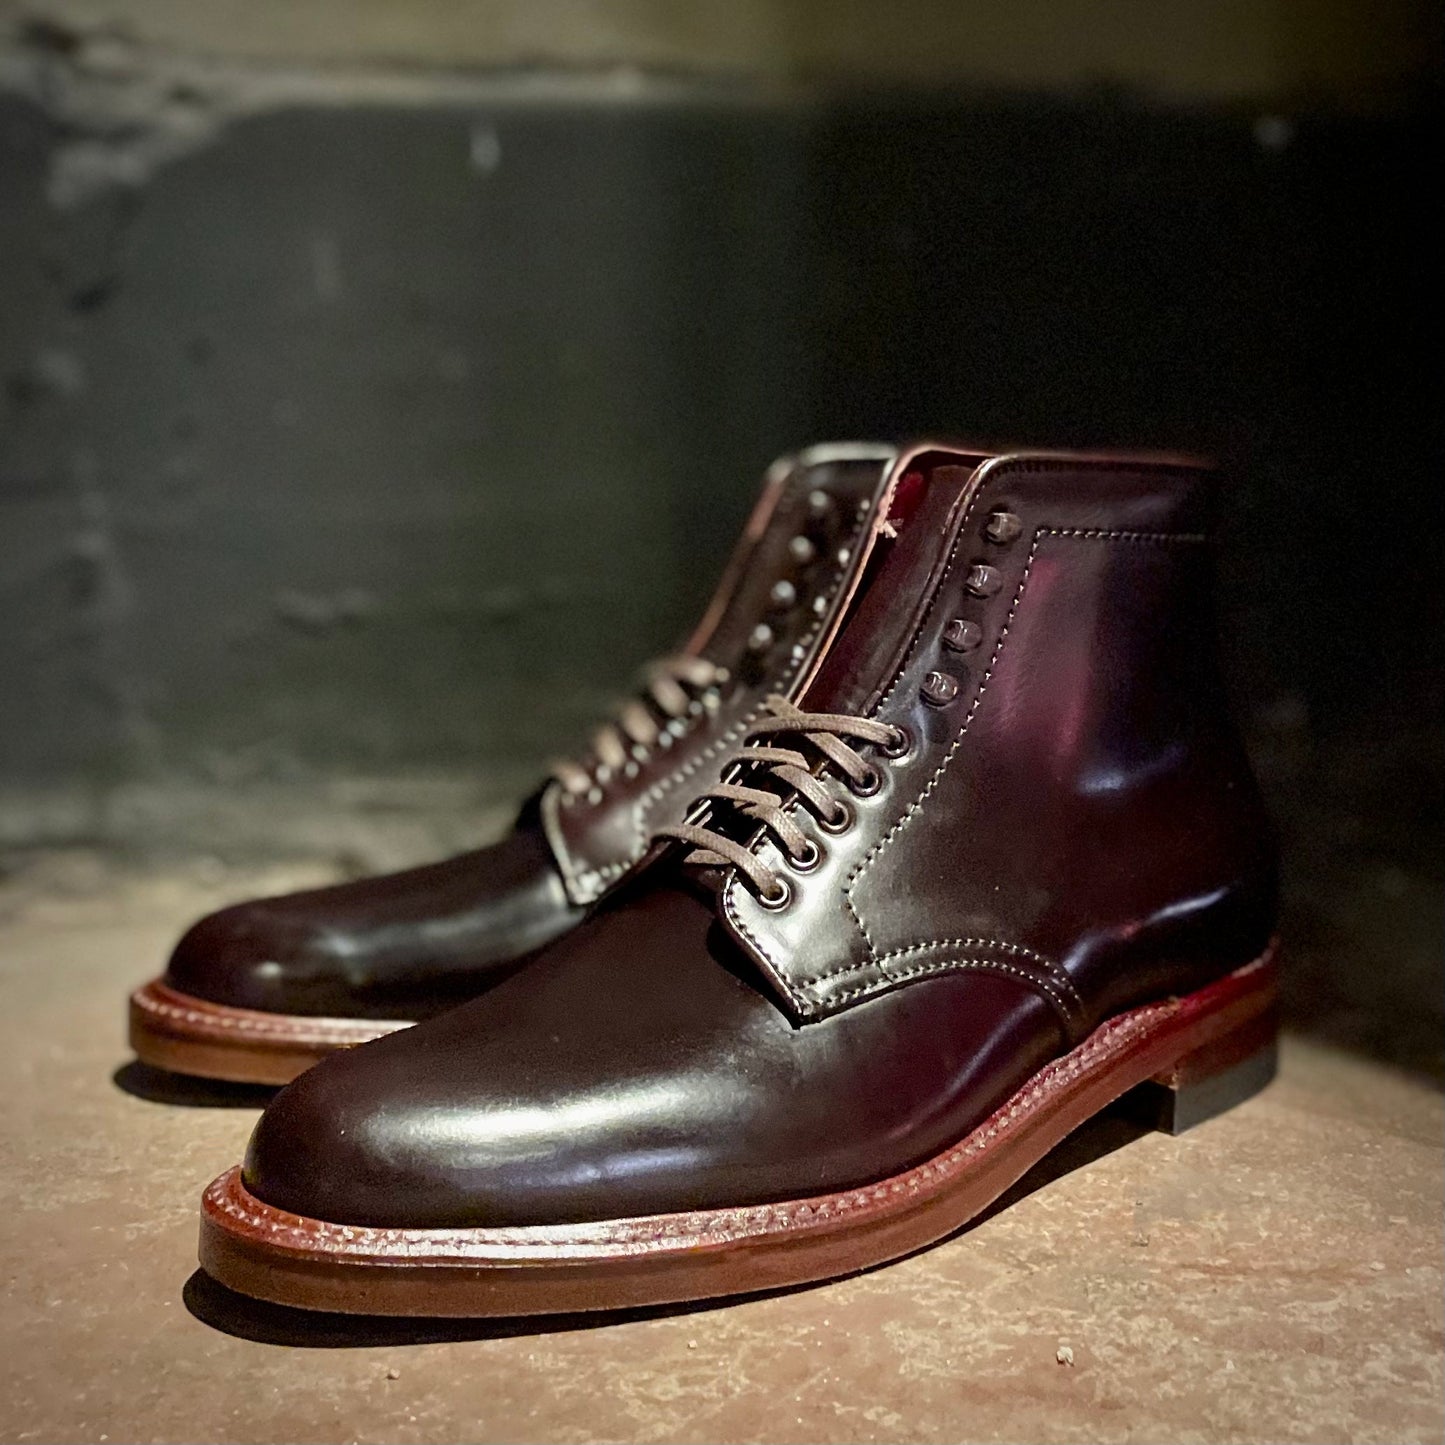 D1854H - Plain Toe Boot w Neocork Sole in Color 8 Shell